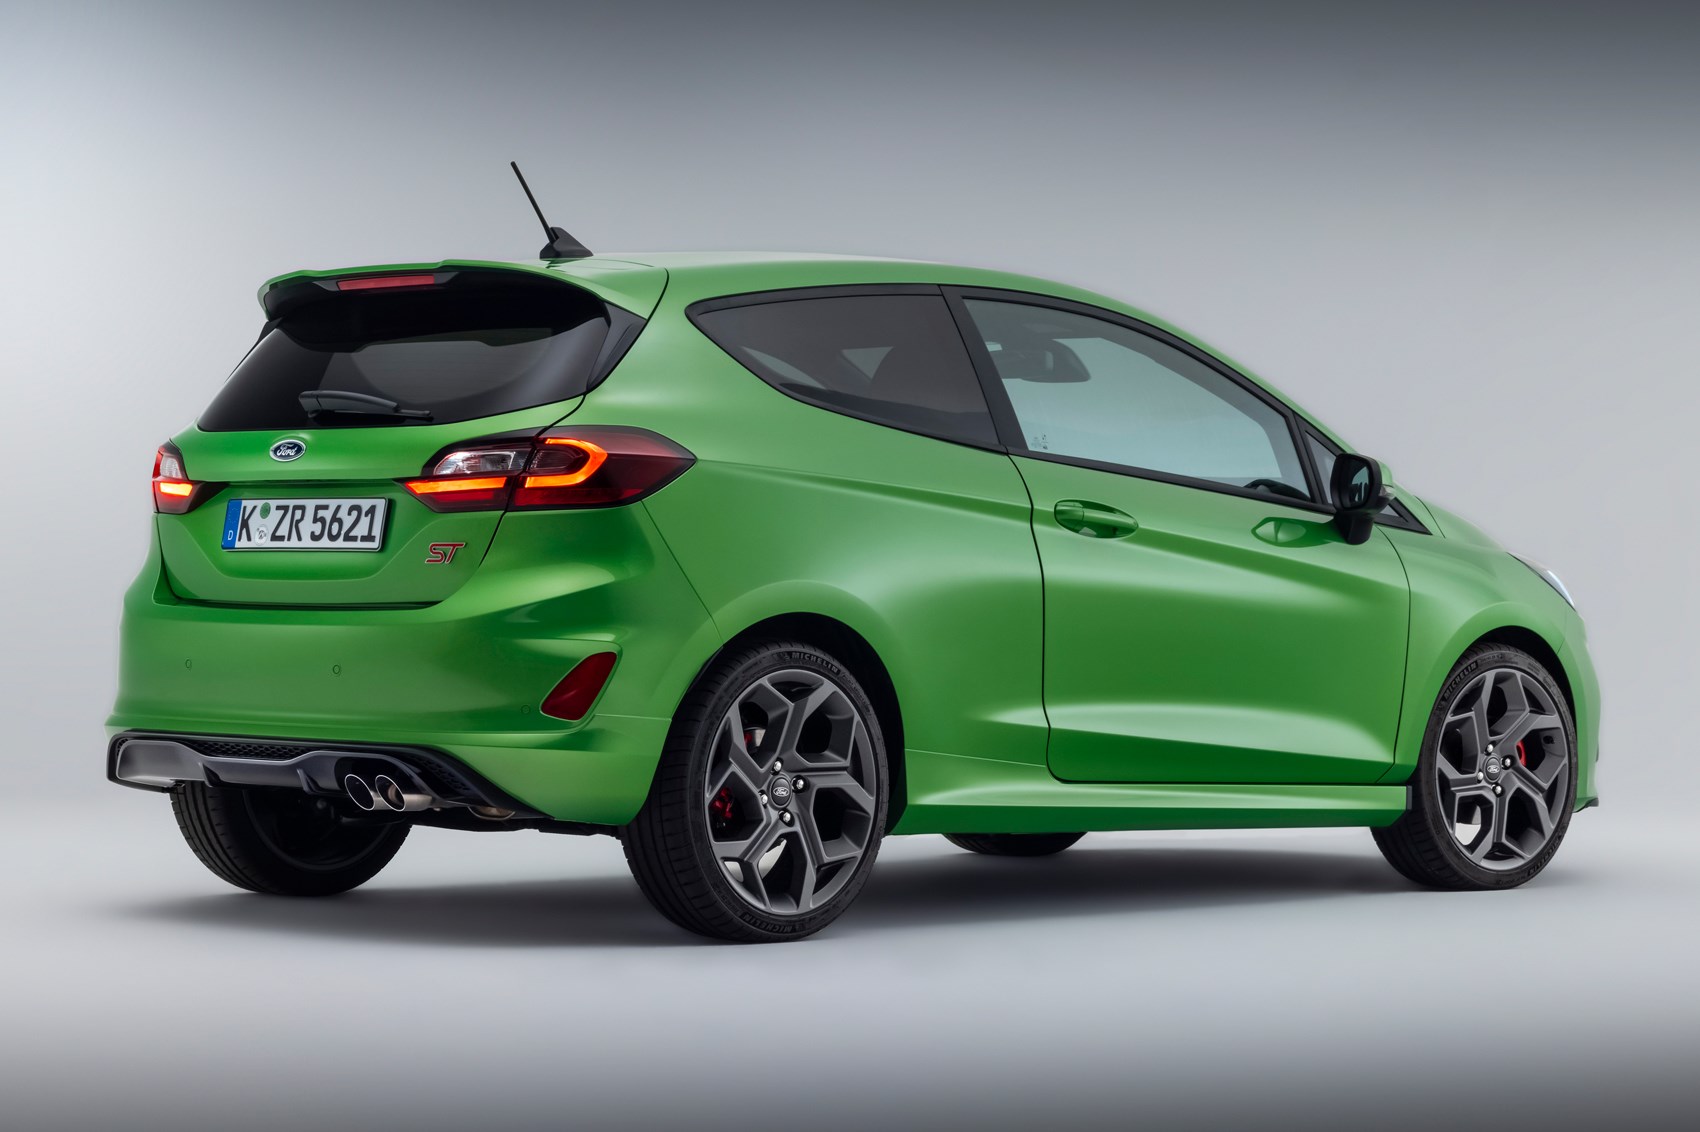 Ford Fiesta [MK7] (2020 - 2021) review